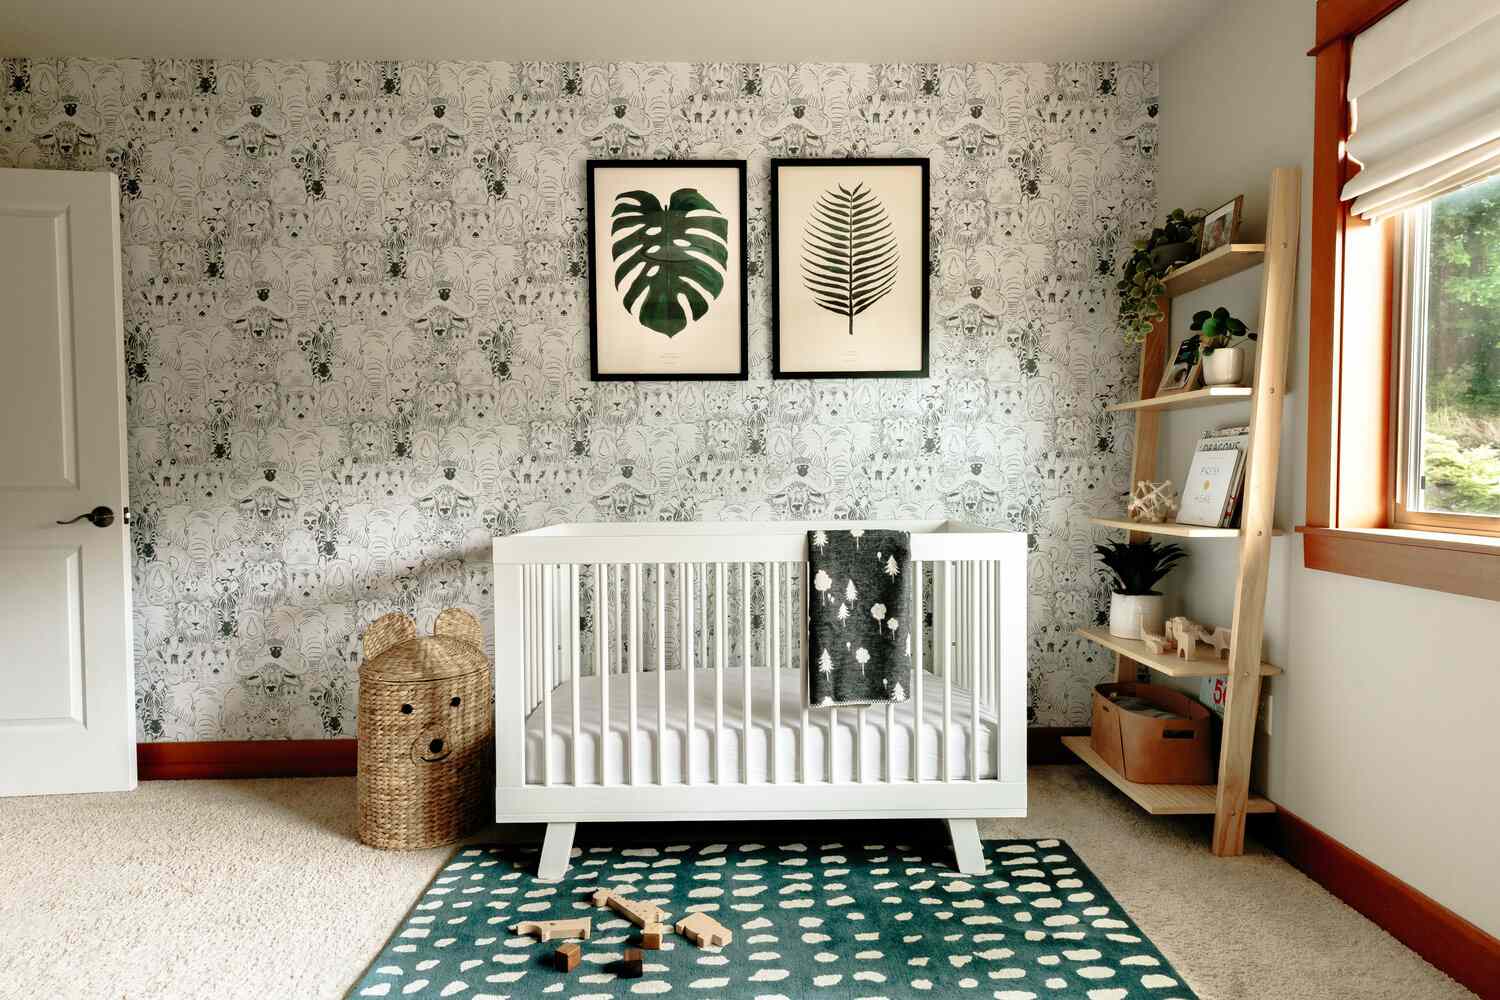 white crib in room with pattern wallpaper, leaf artwork on wall